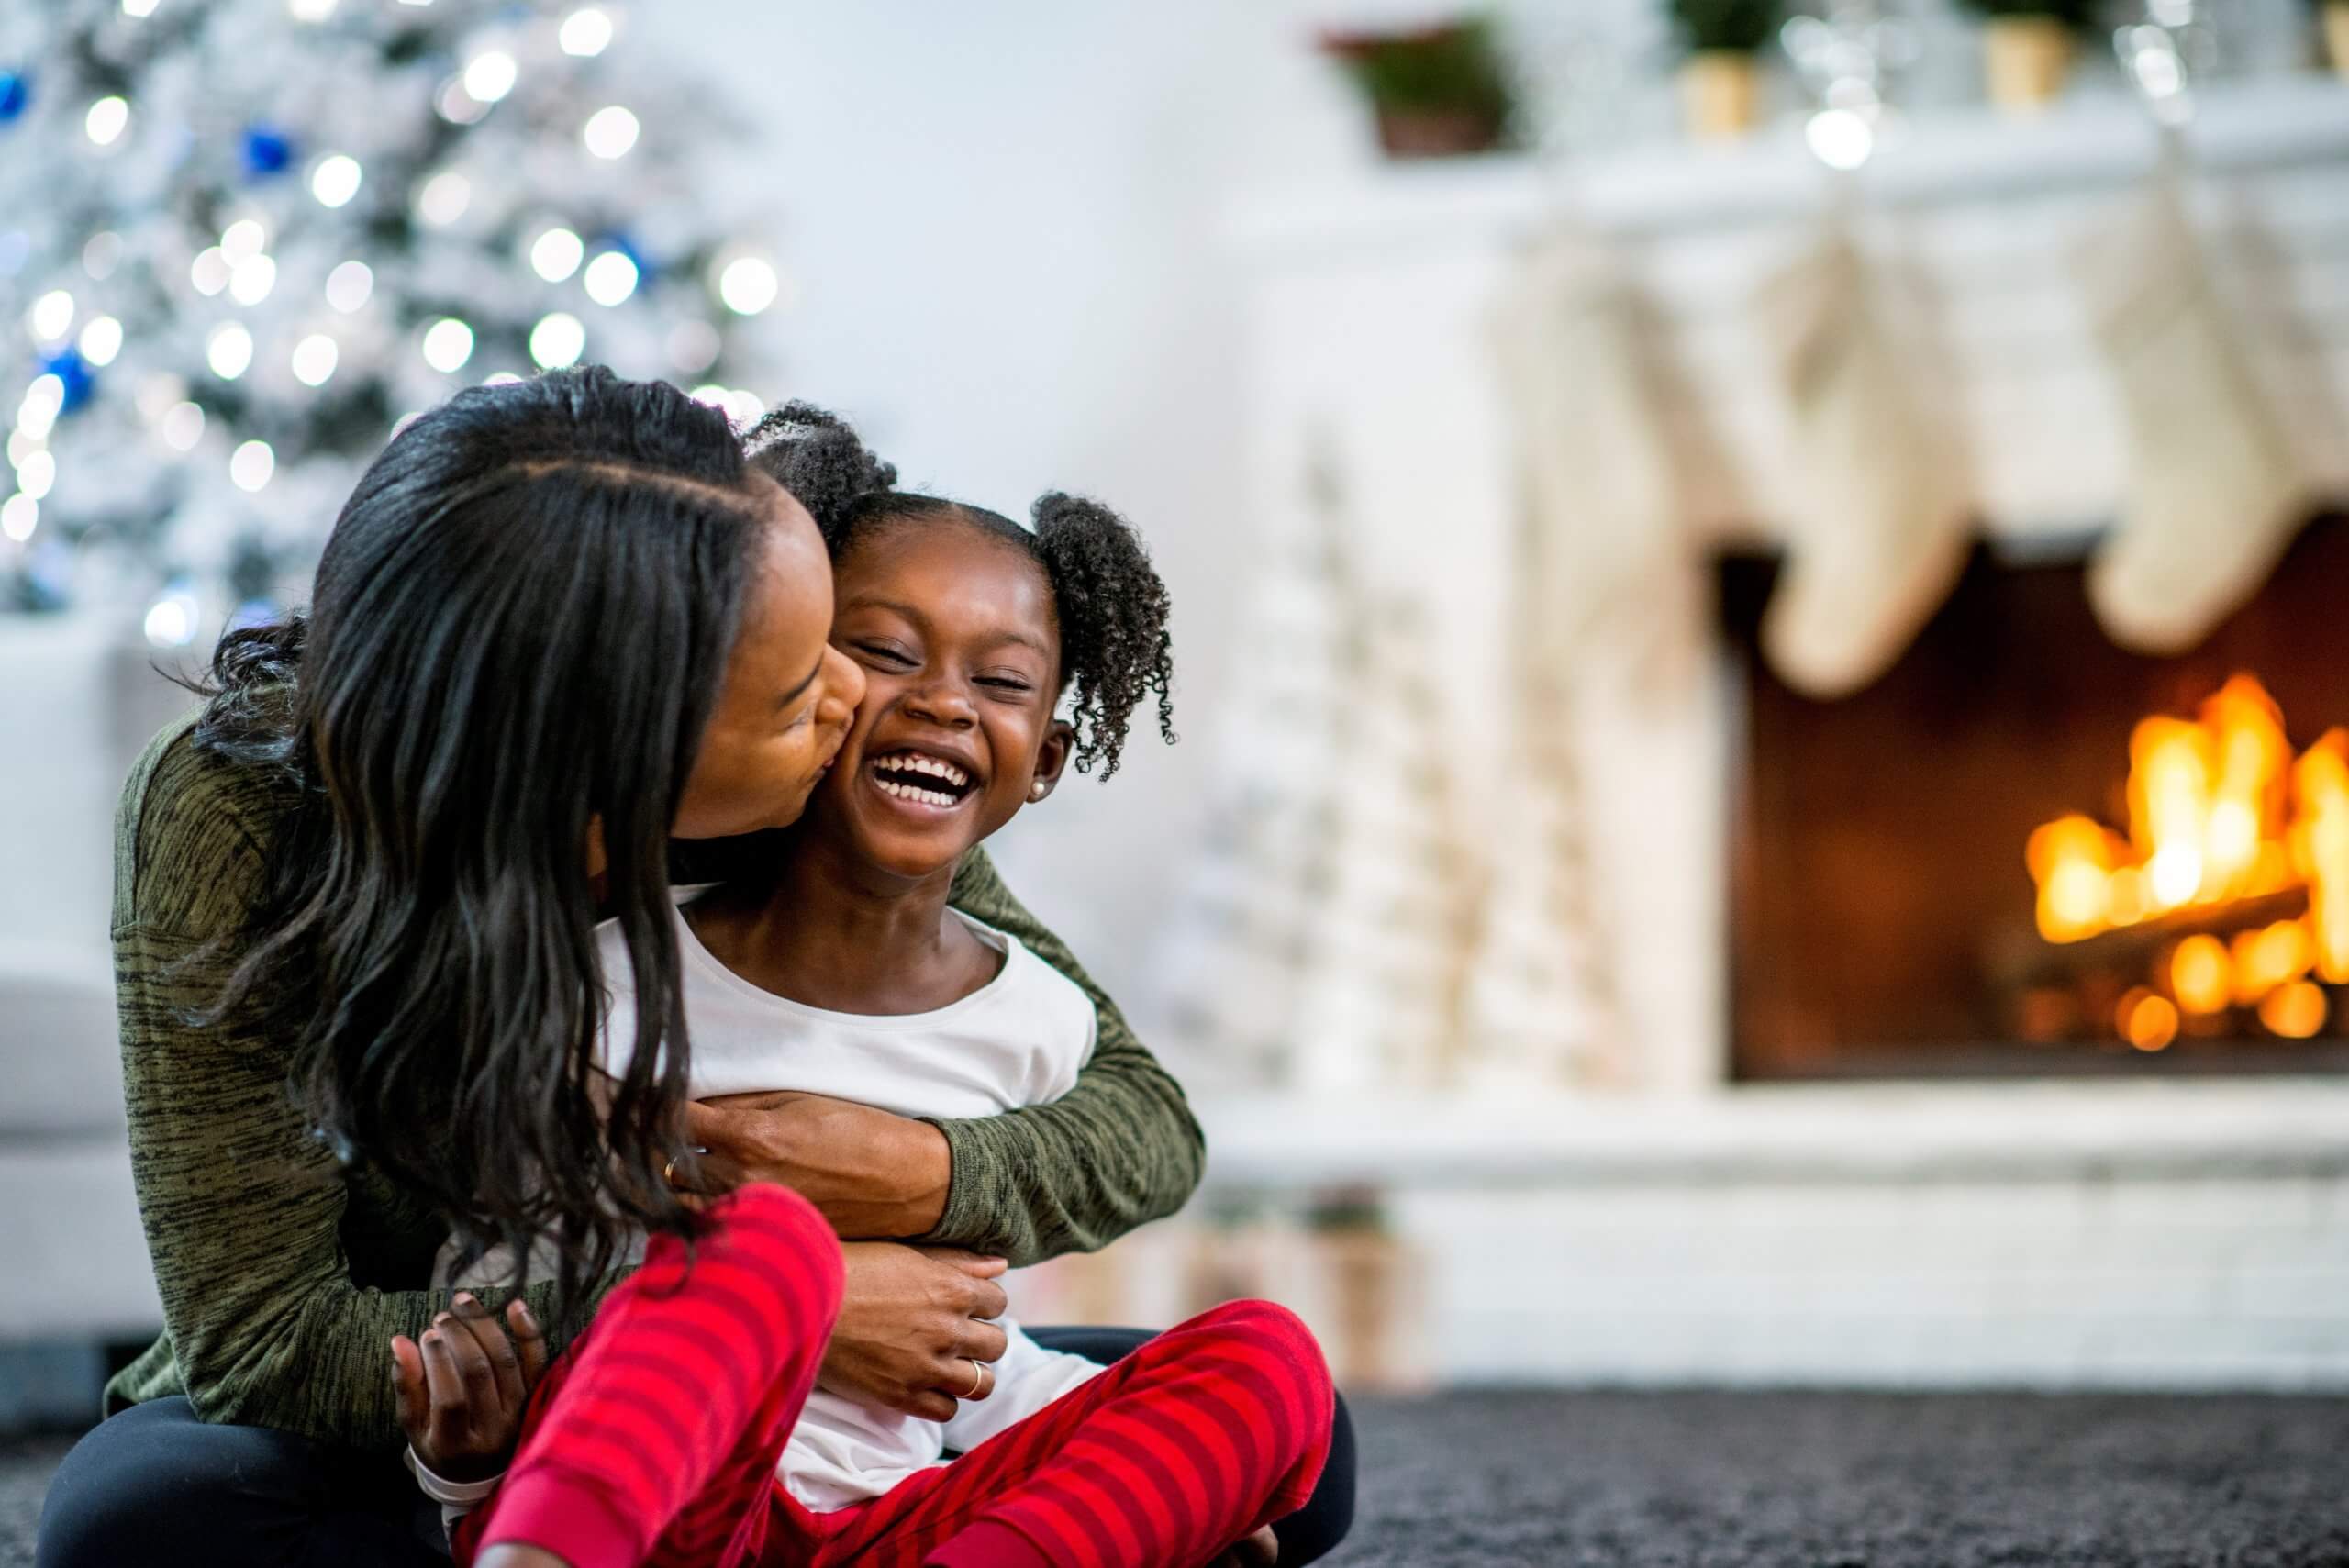 Photograph of mother and daugher hugging in front of a Christmas tree. There is a log fire with stocking hanging up in the background of the picture.